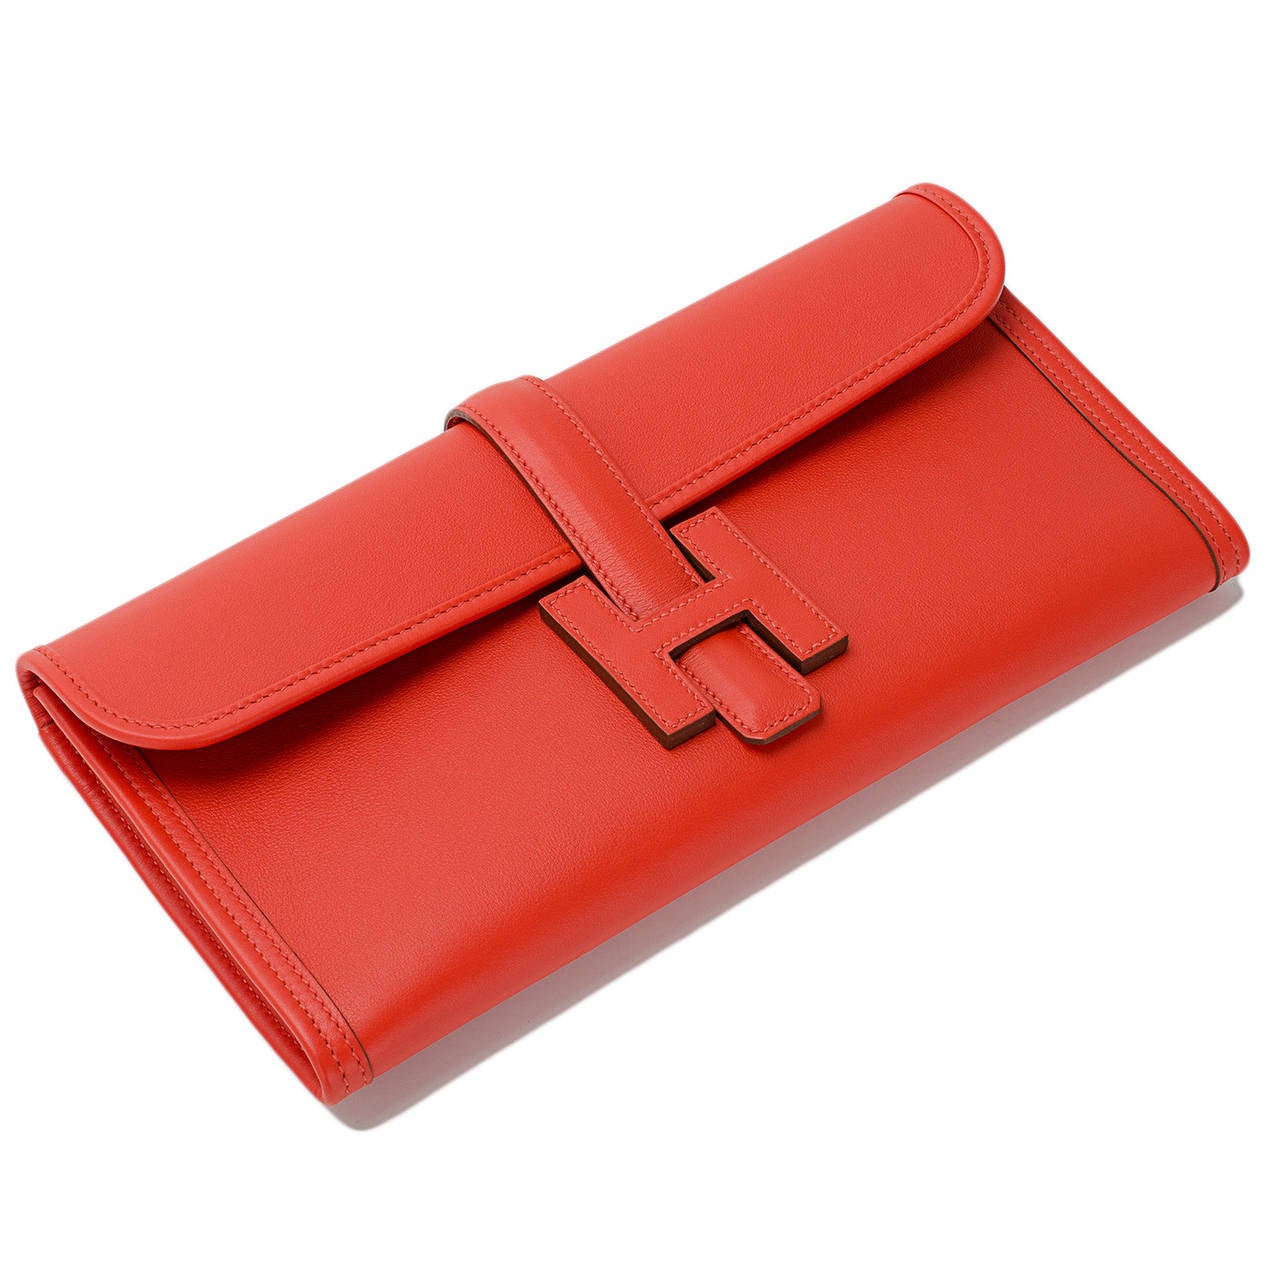 Hermes Capucine Swift Jige Elan Clutch 29cm In New Condition For Sale In New York, NY